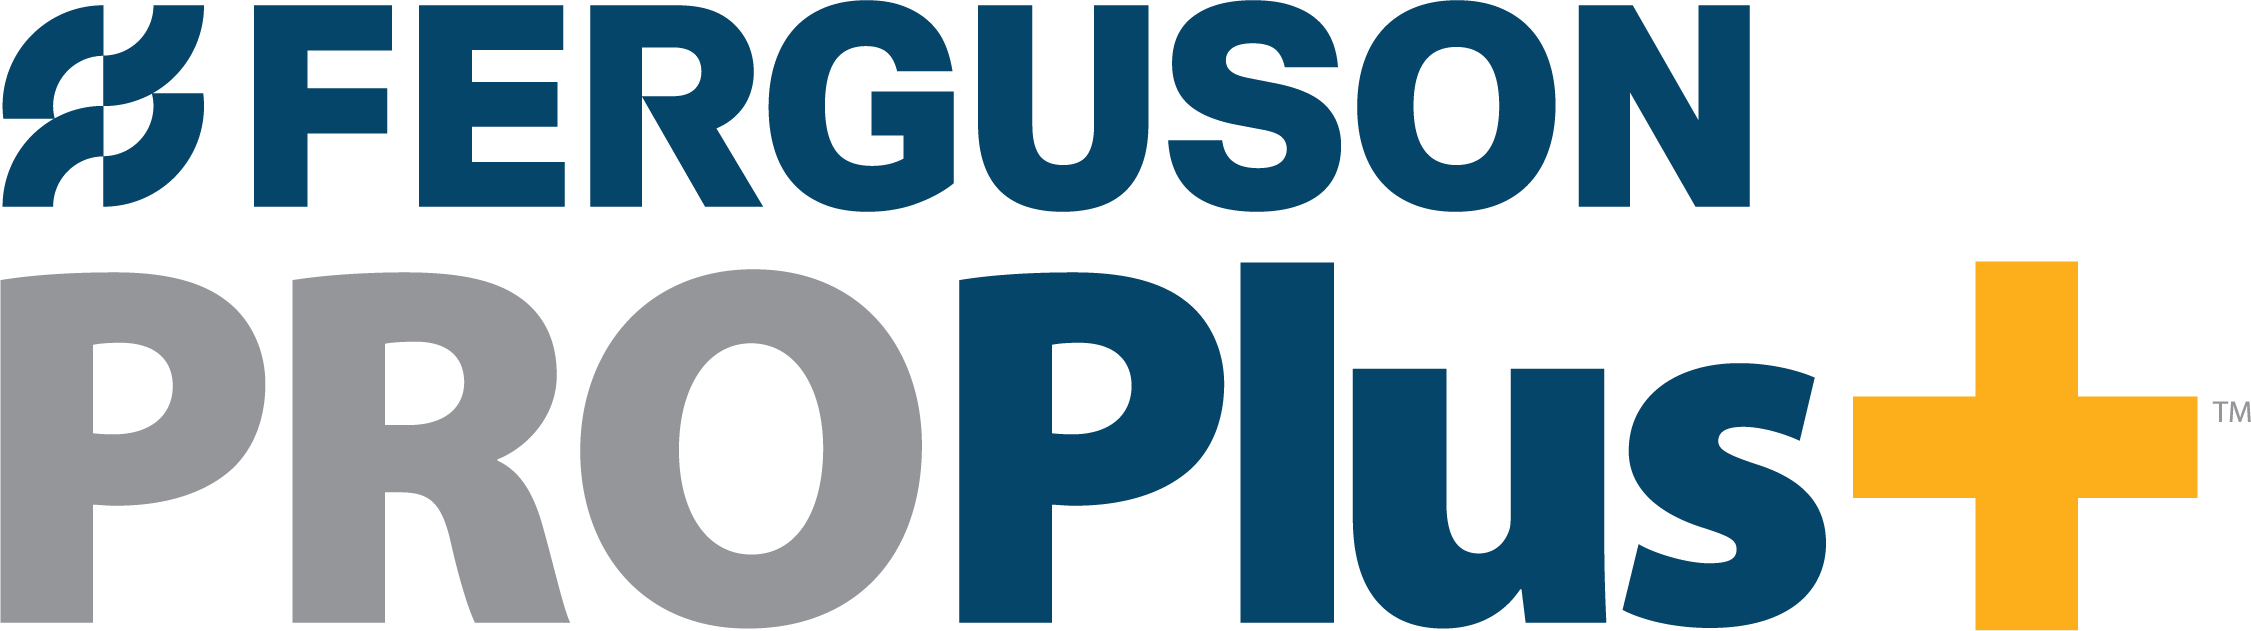 The Ferguson PRO Plus logo written in blue and gray with a yellow plus sign to the right.